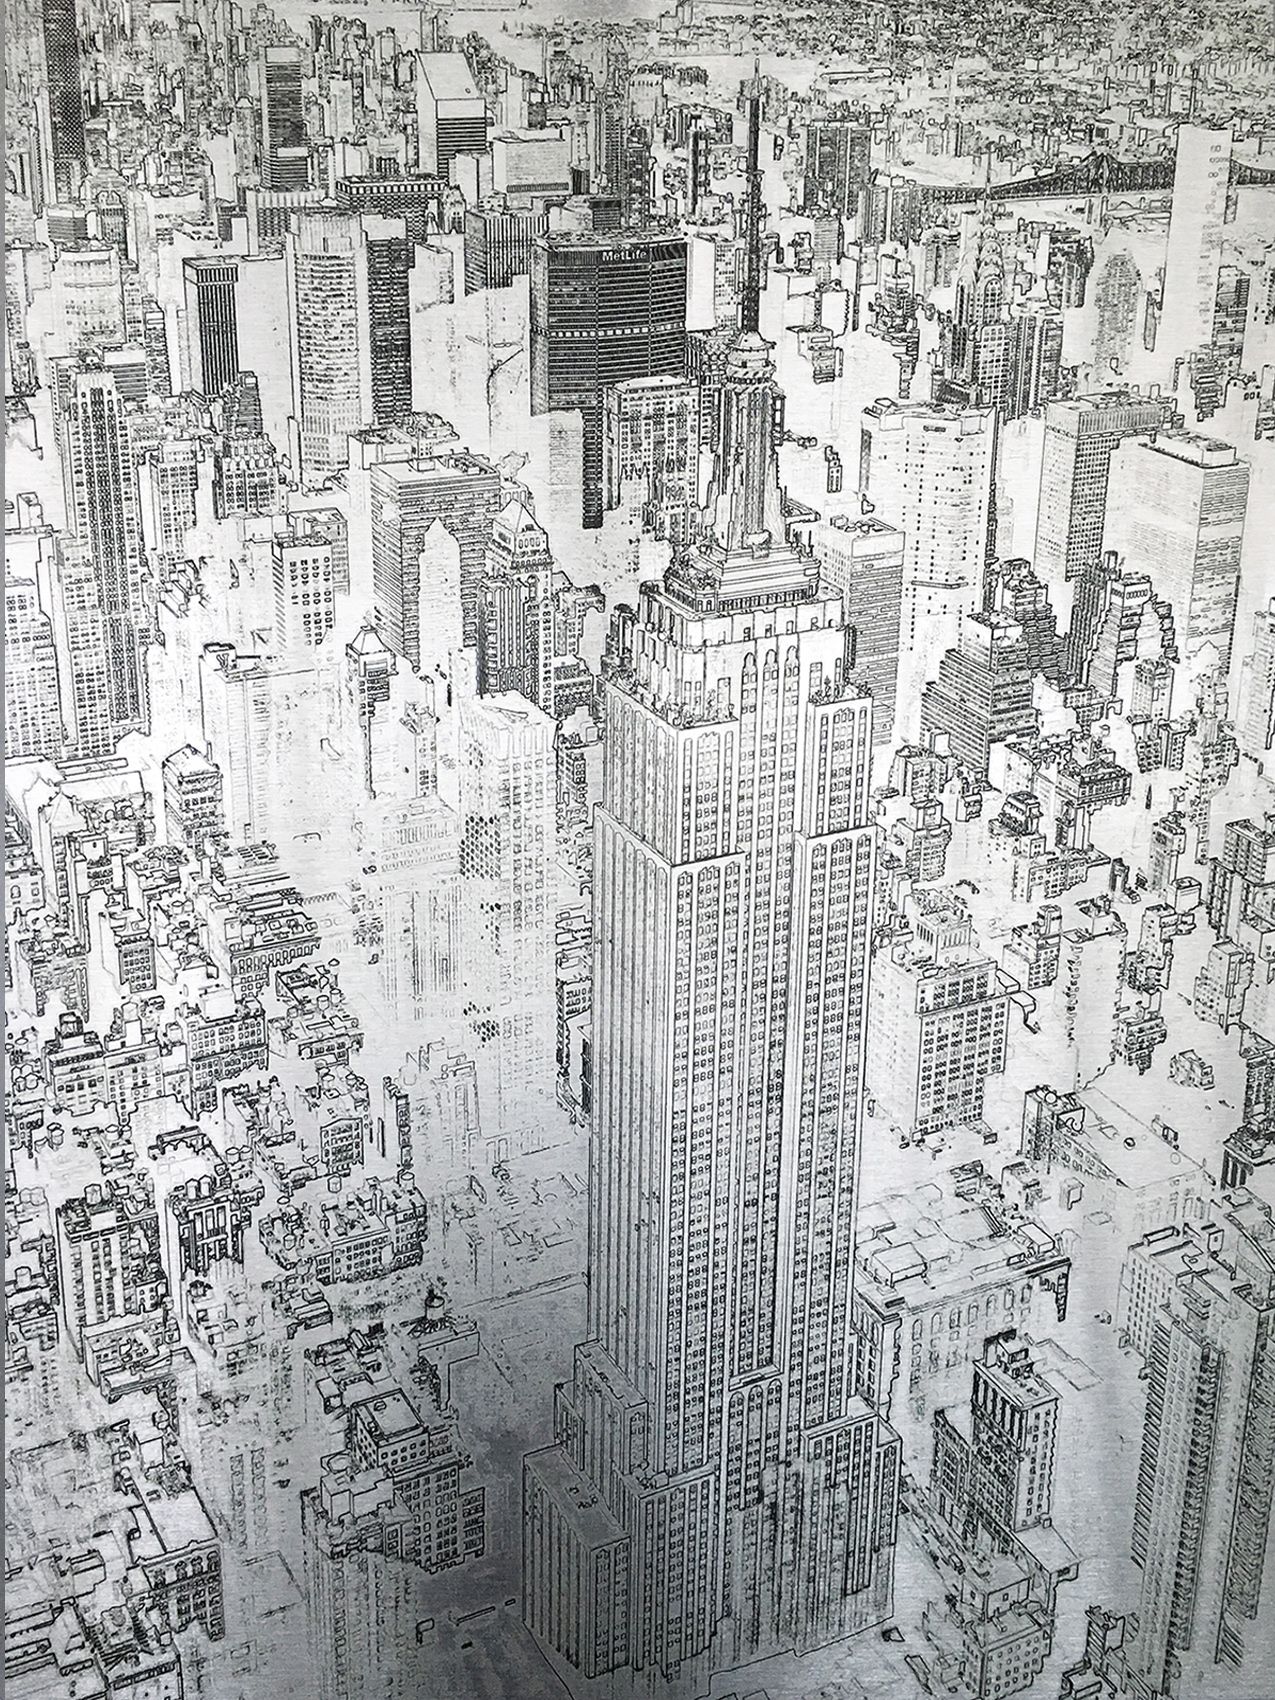 Empire State Building, Silver by Michael Wallner